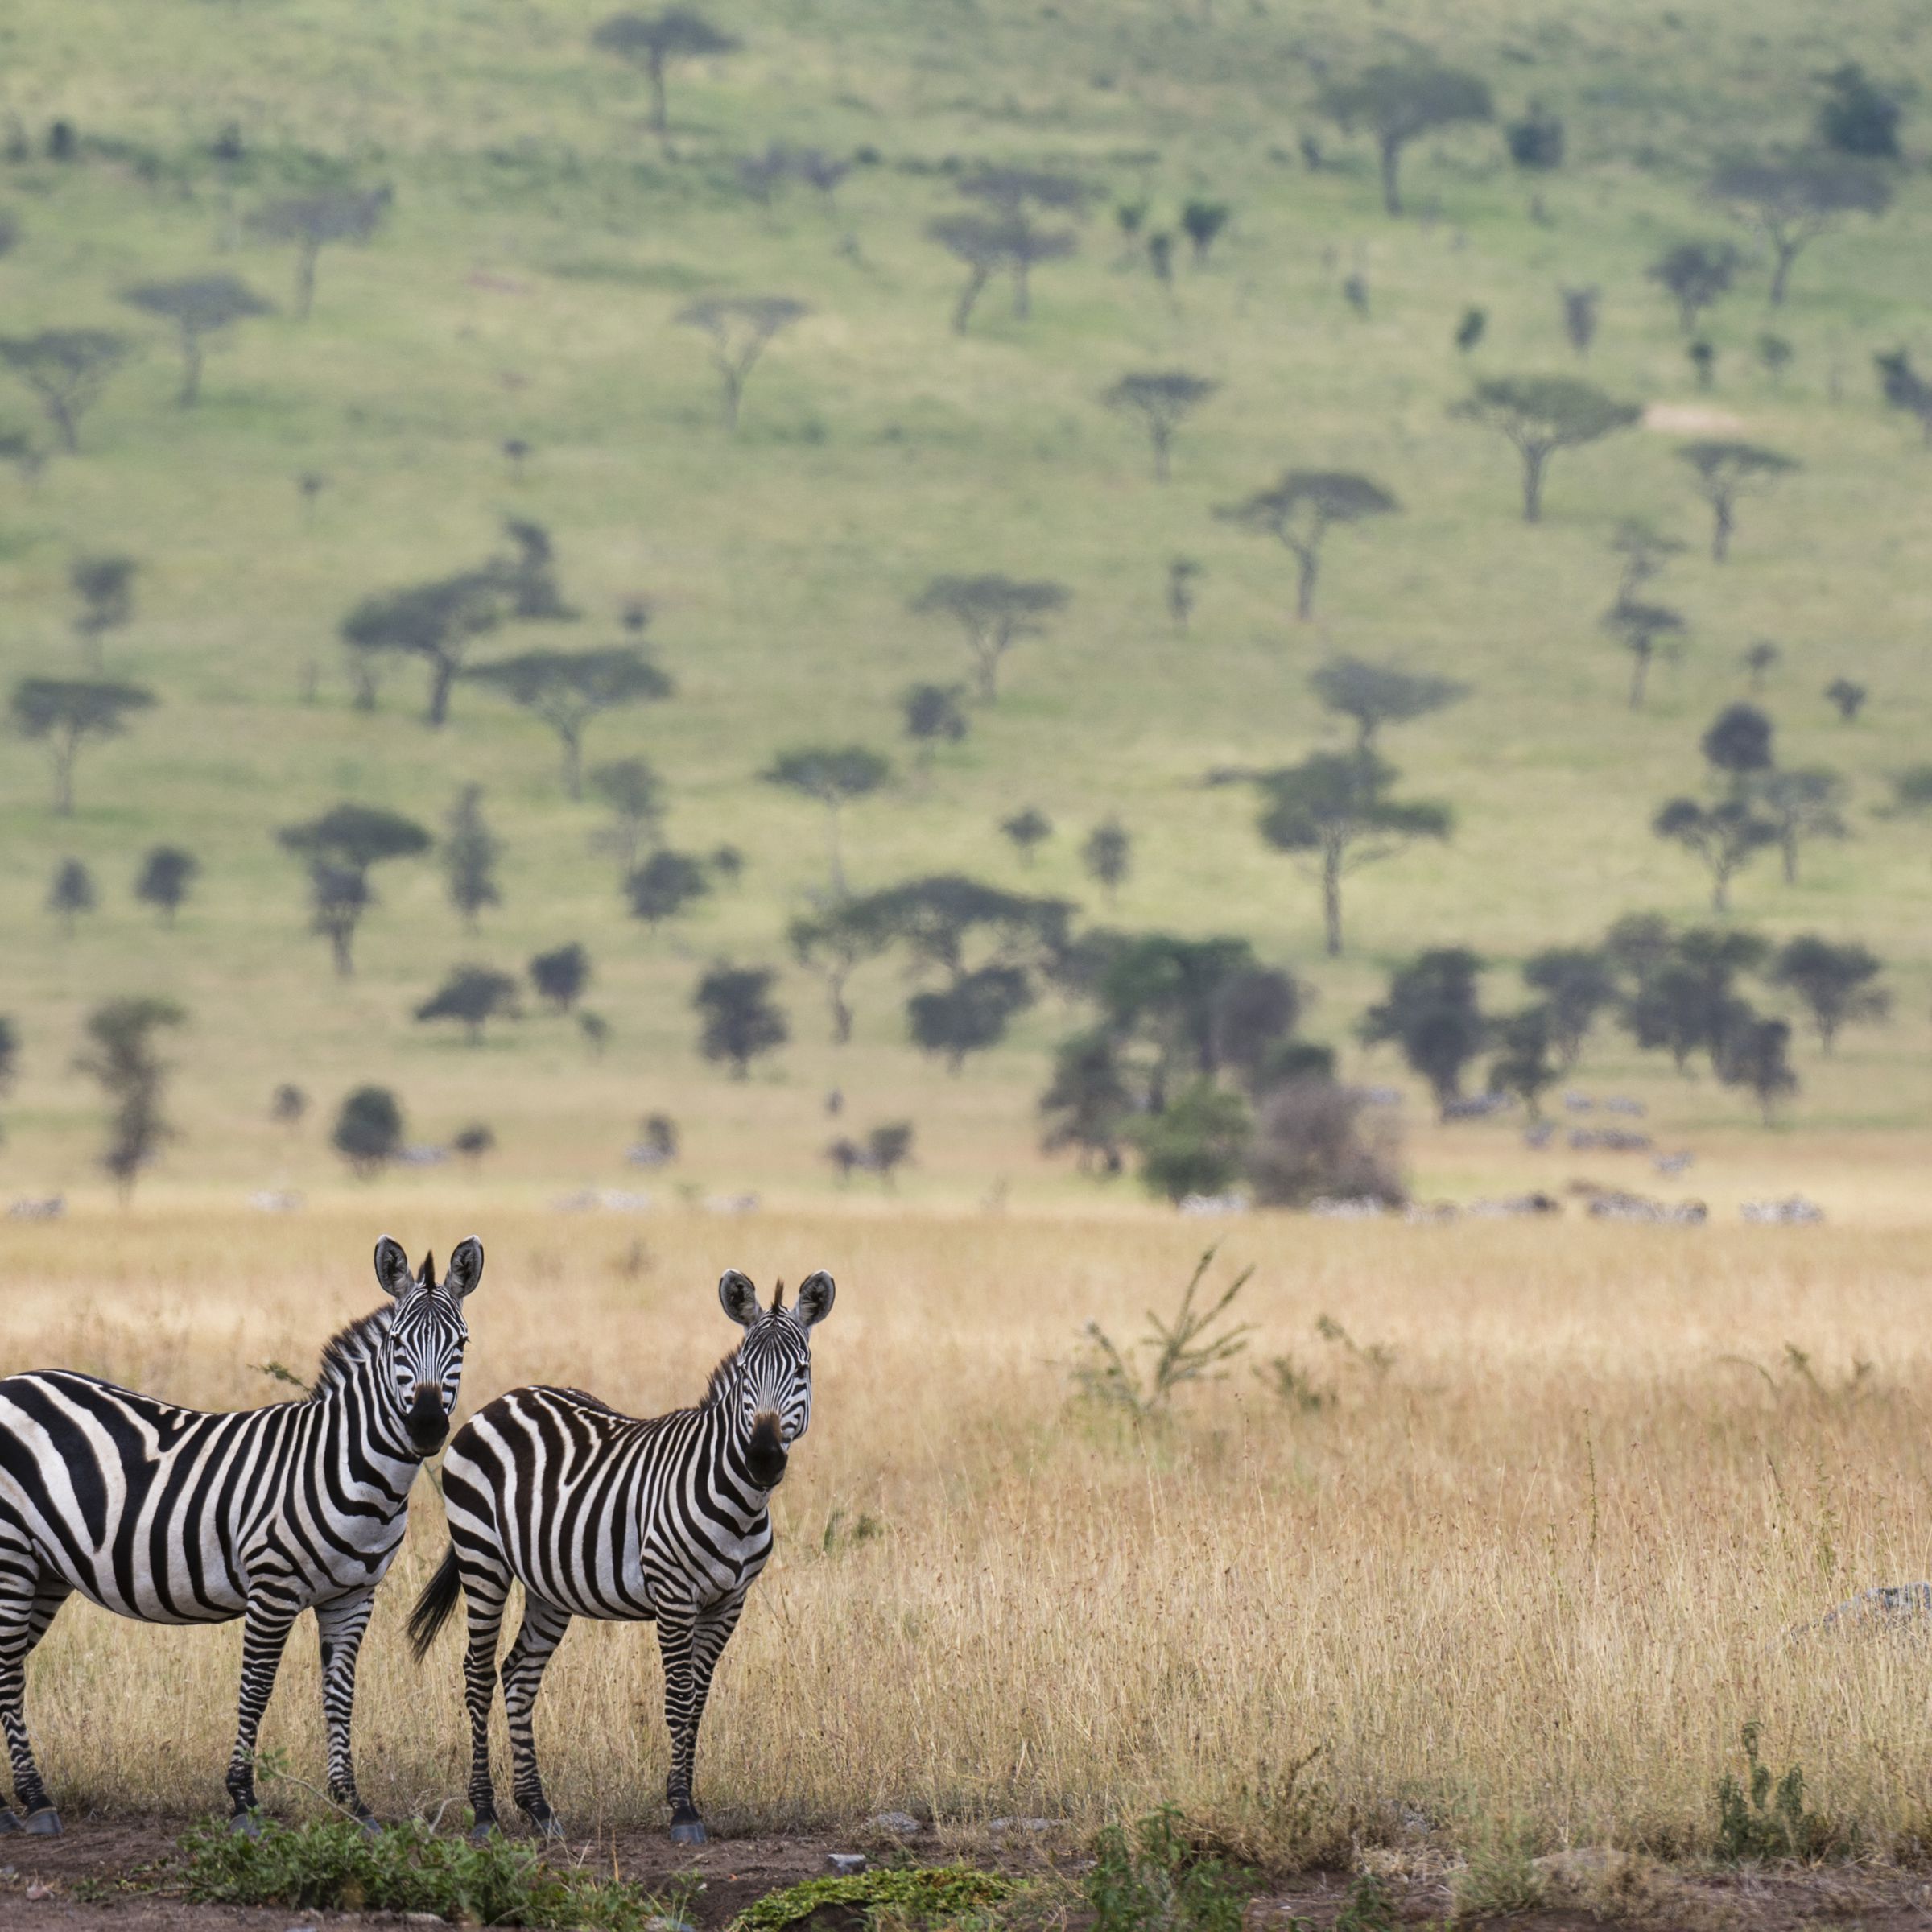 Two zebras stand in the foreground. In the background, trees dot a grassy landscape.